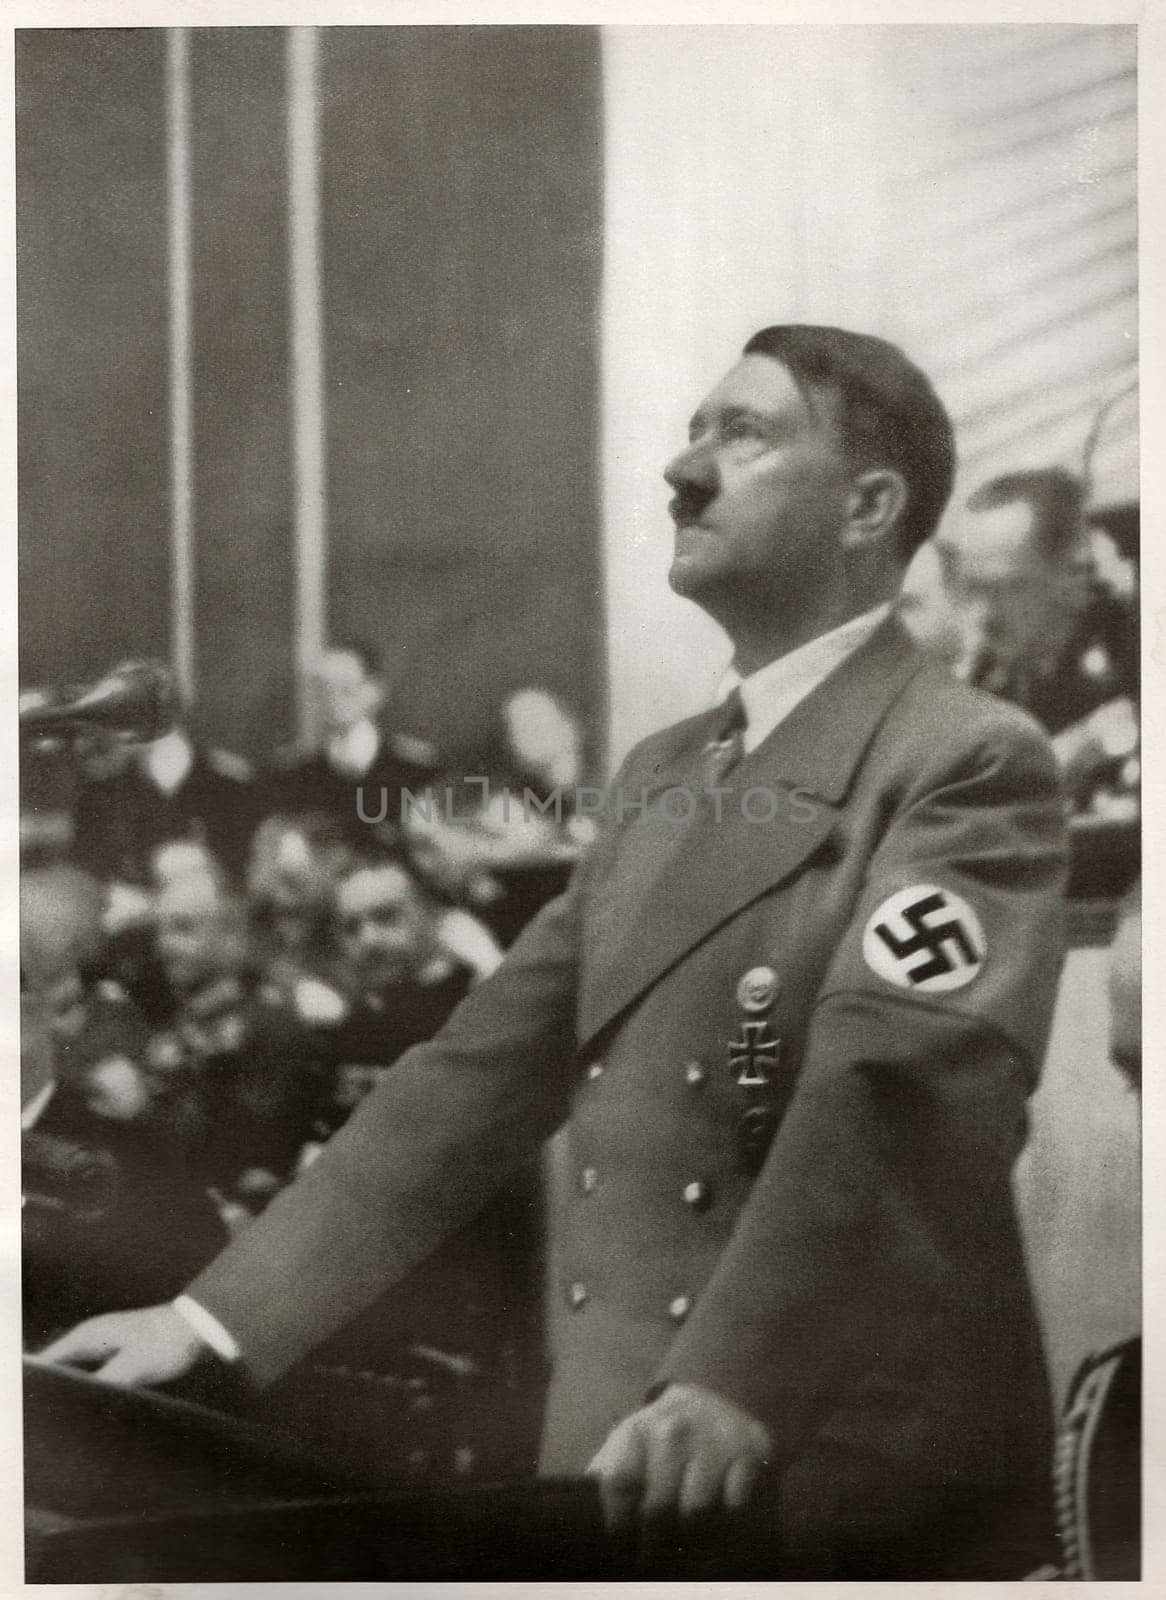 BERLIN, GERMANY - JANUARY 30, 1939: Hitler speaks to the Reichstag on the Jewish Question. Reproduction of antique photo.